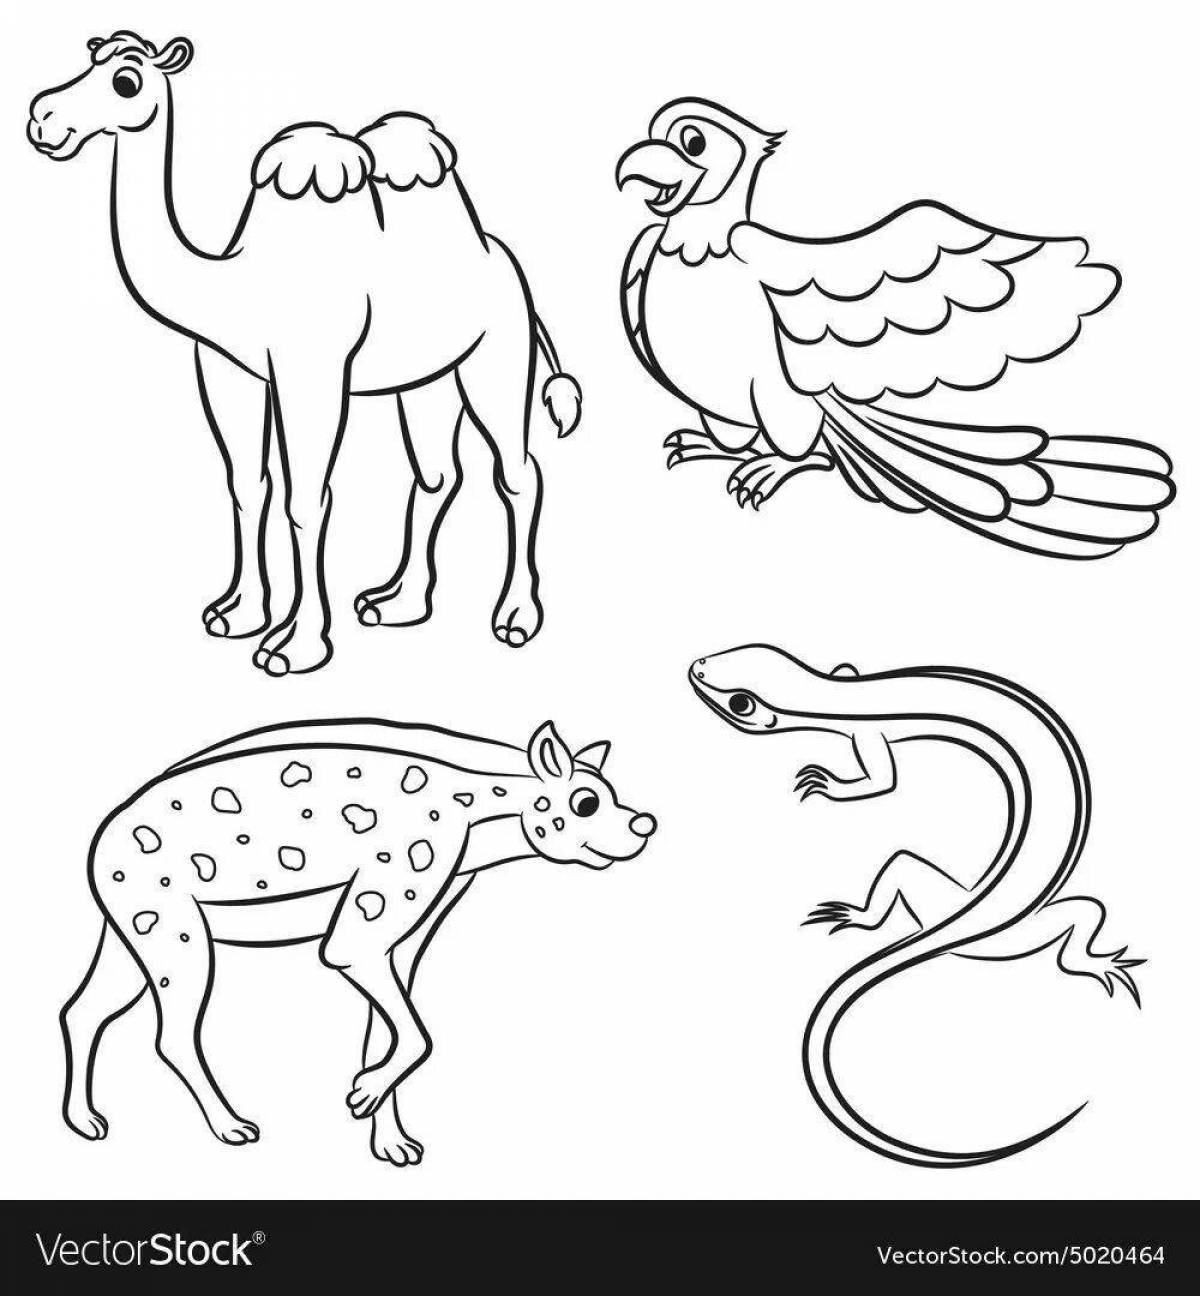 Majestic desert animal coloring pages